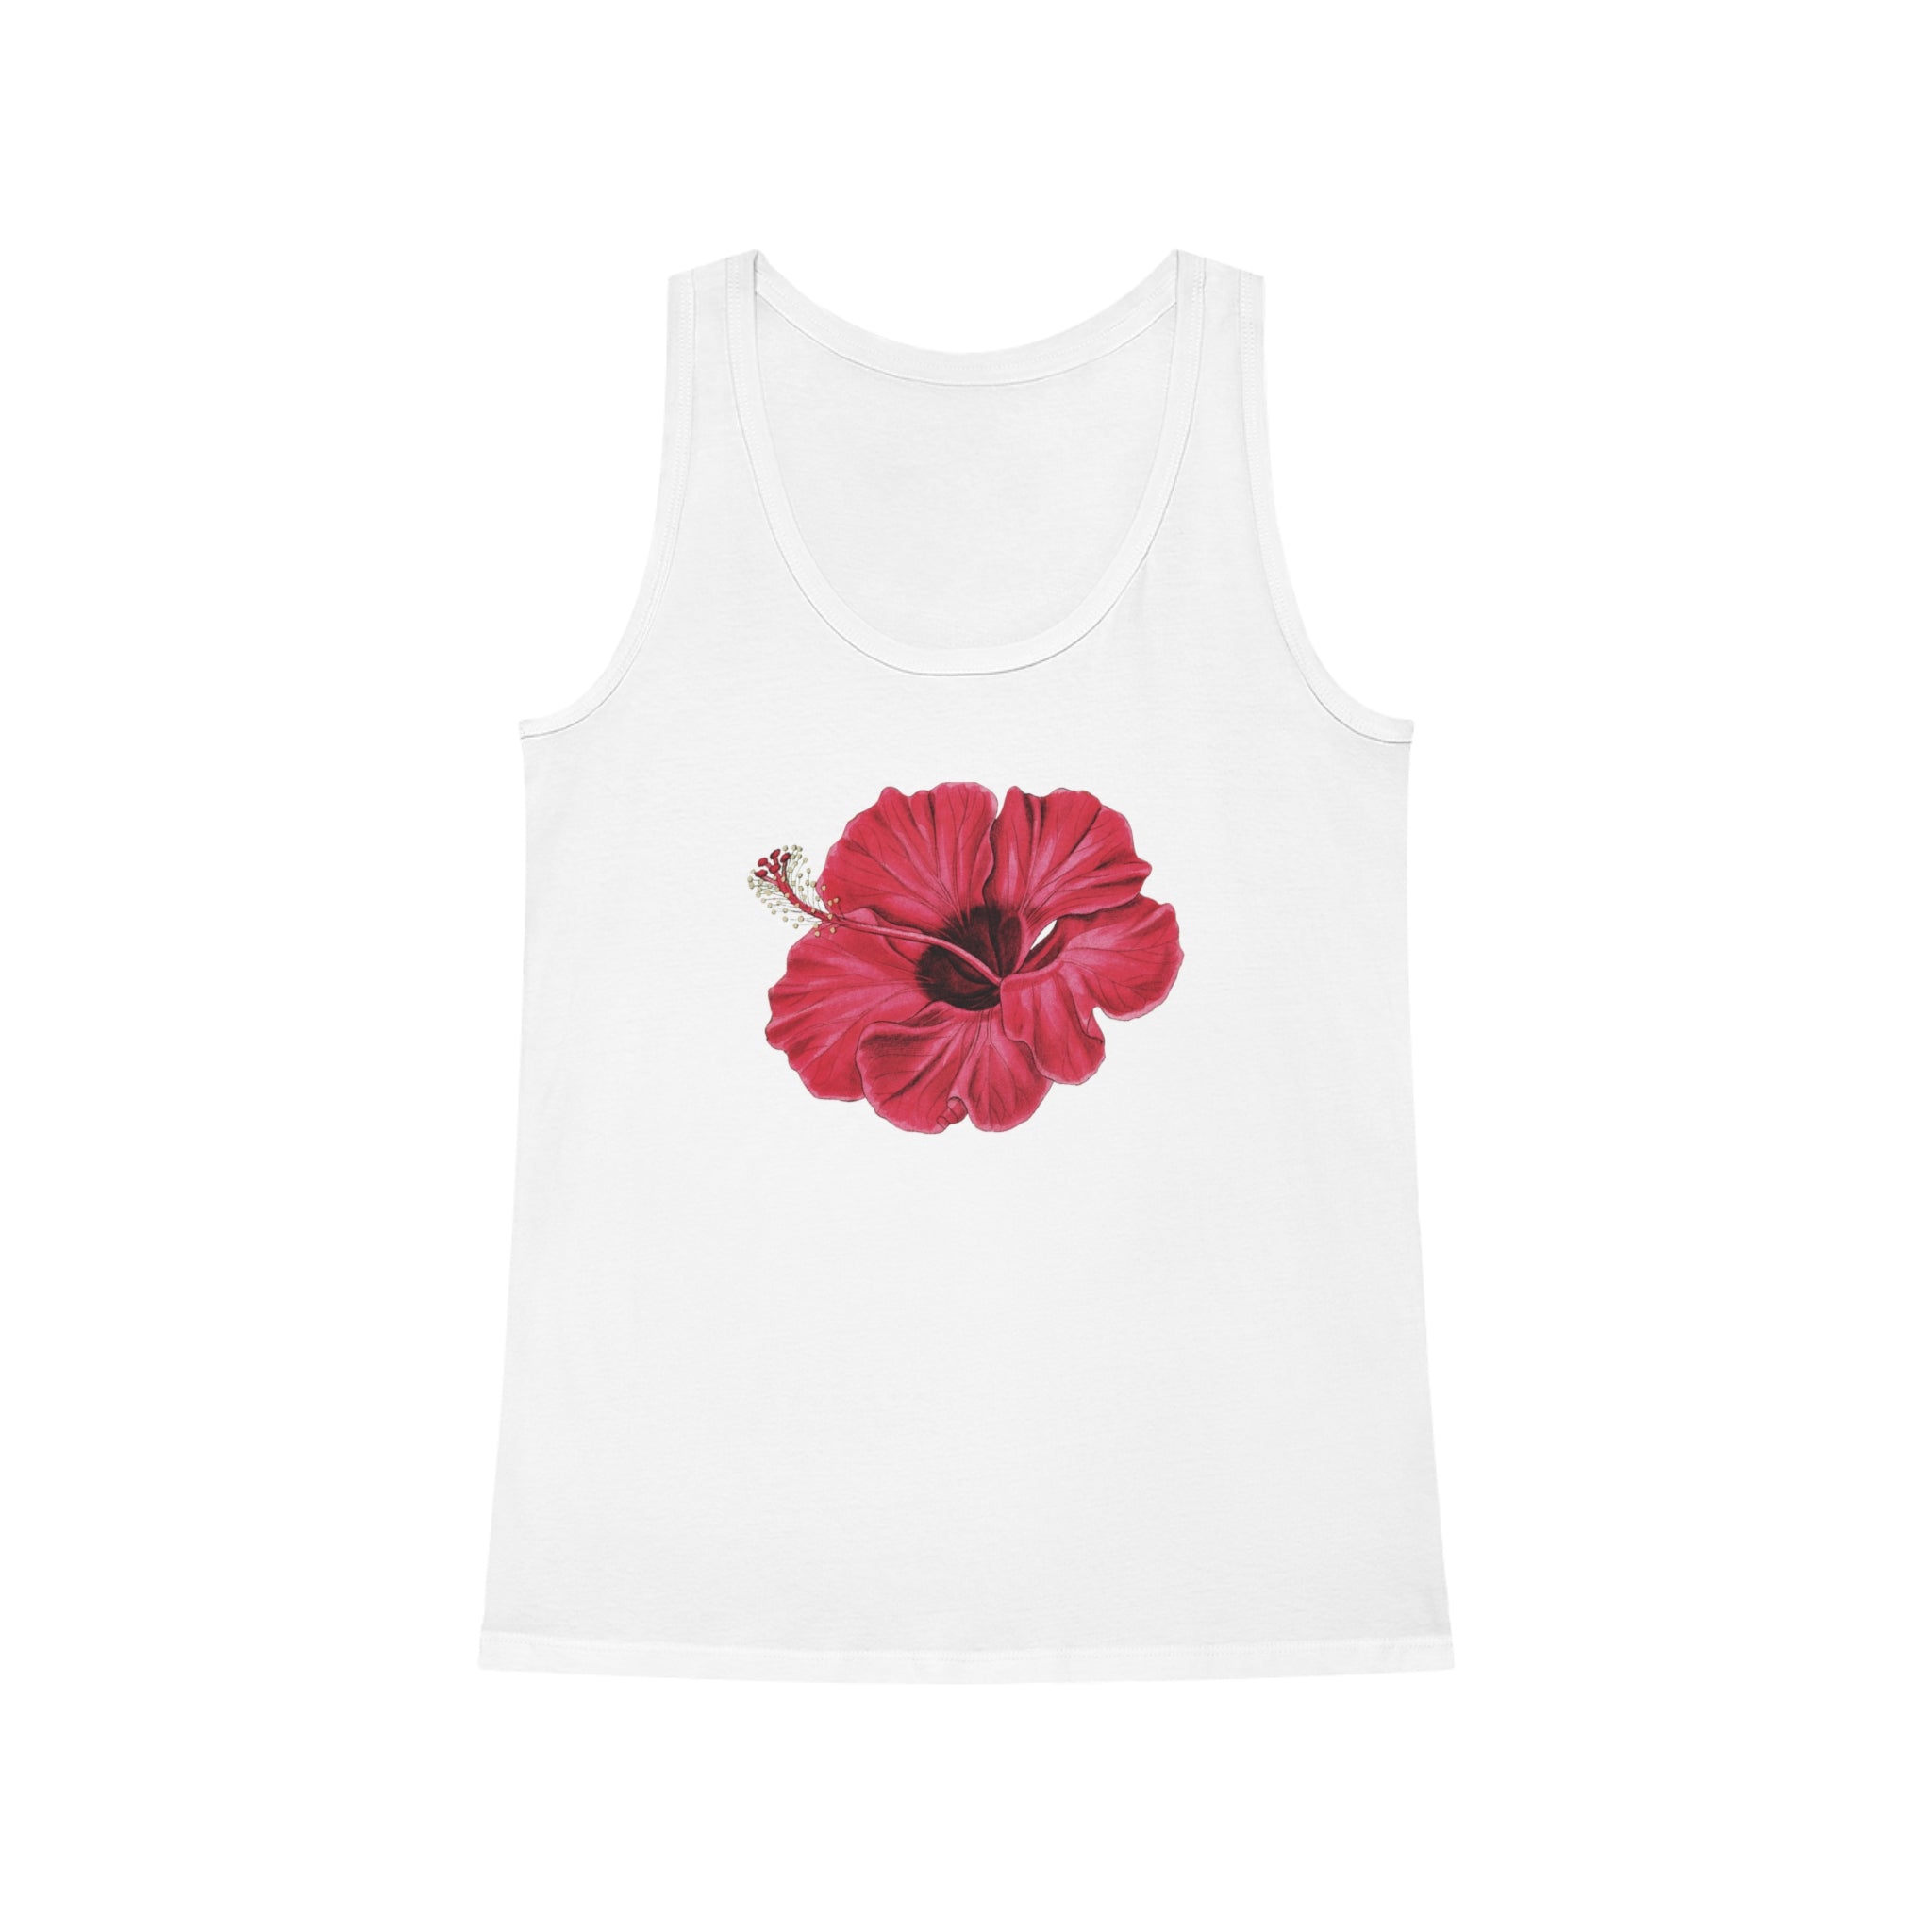 Flower Red Tank Top for women.